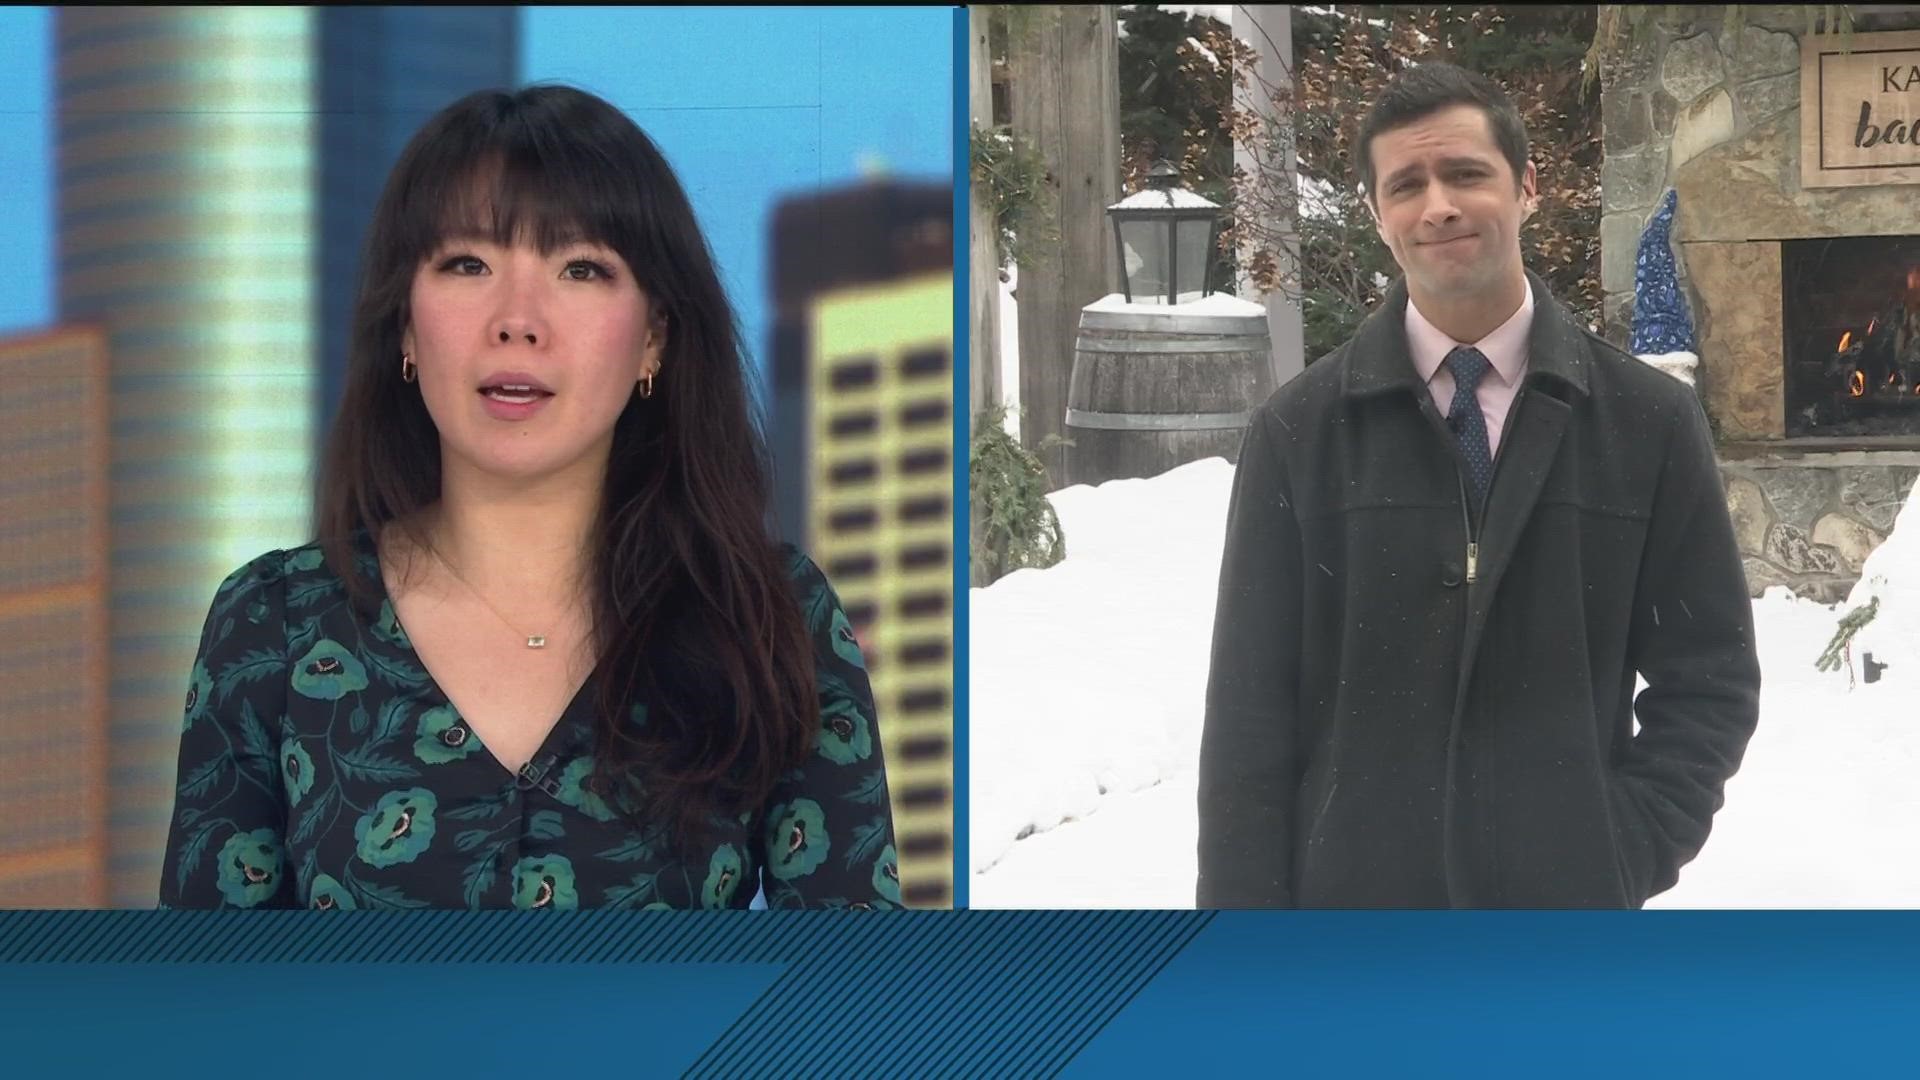 Watch the latest news and weather updates on KARE 11 News Now for Jan. 25, 2023.